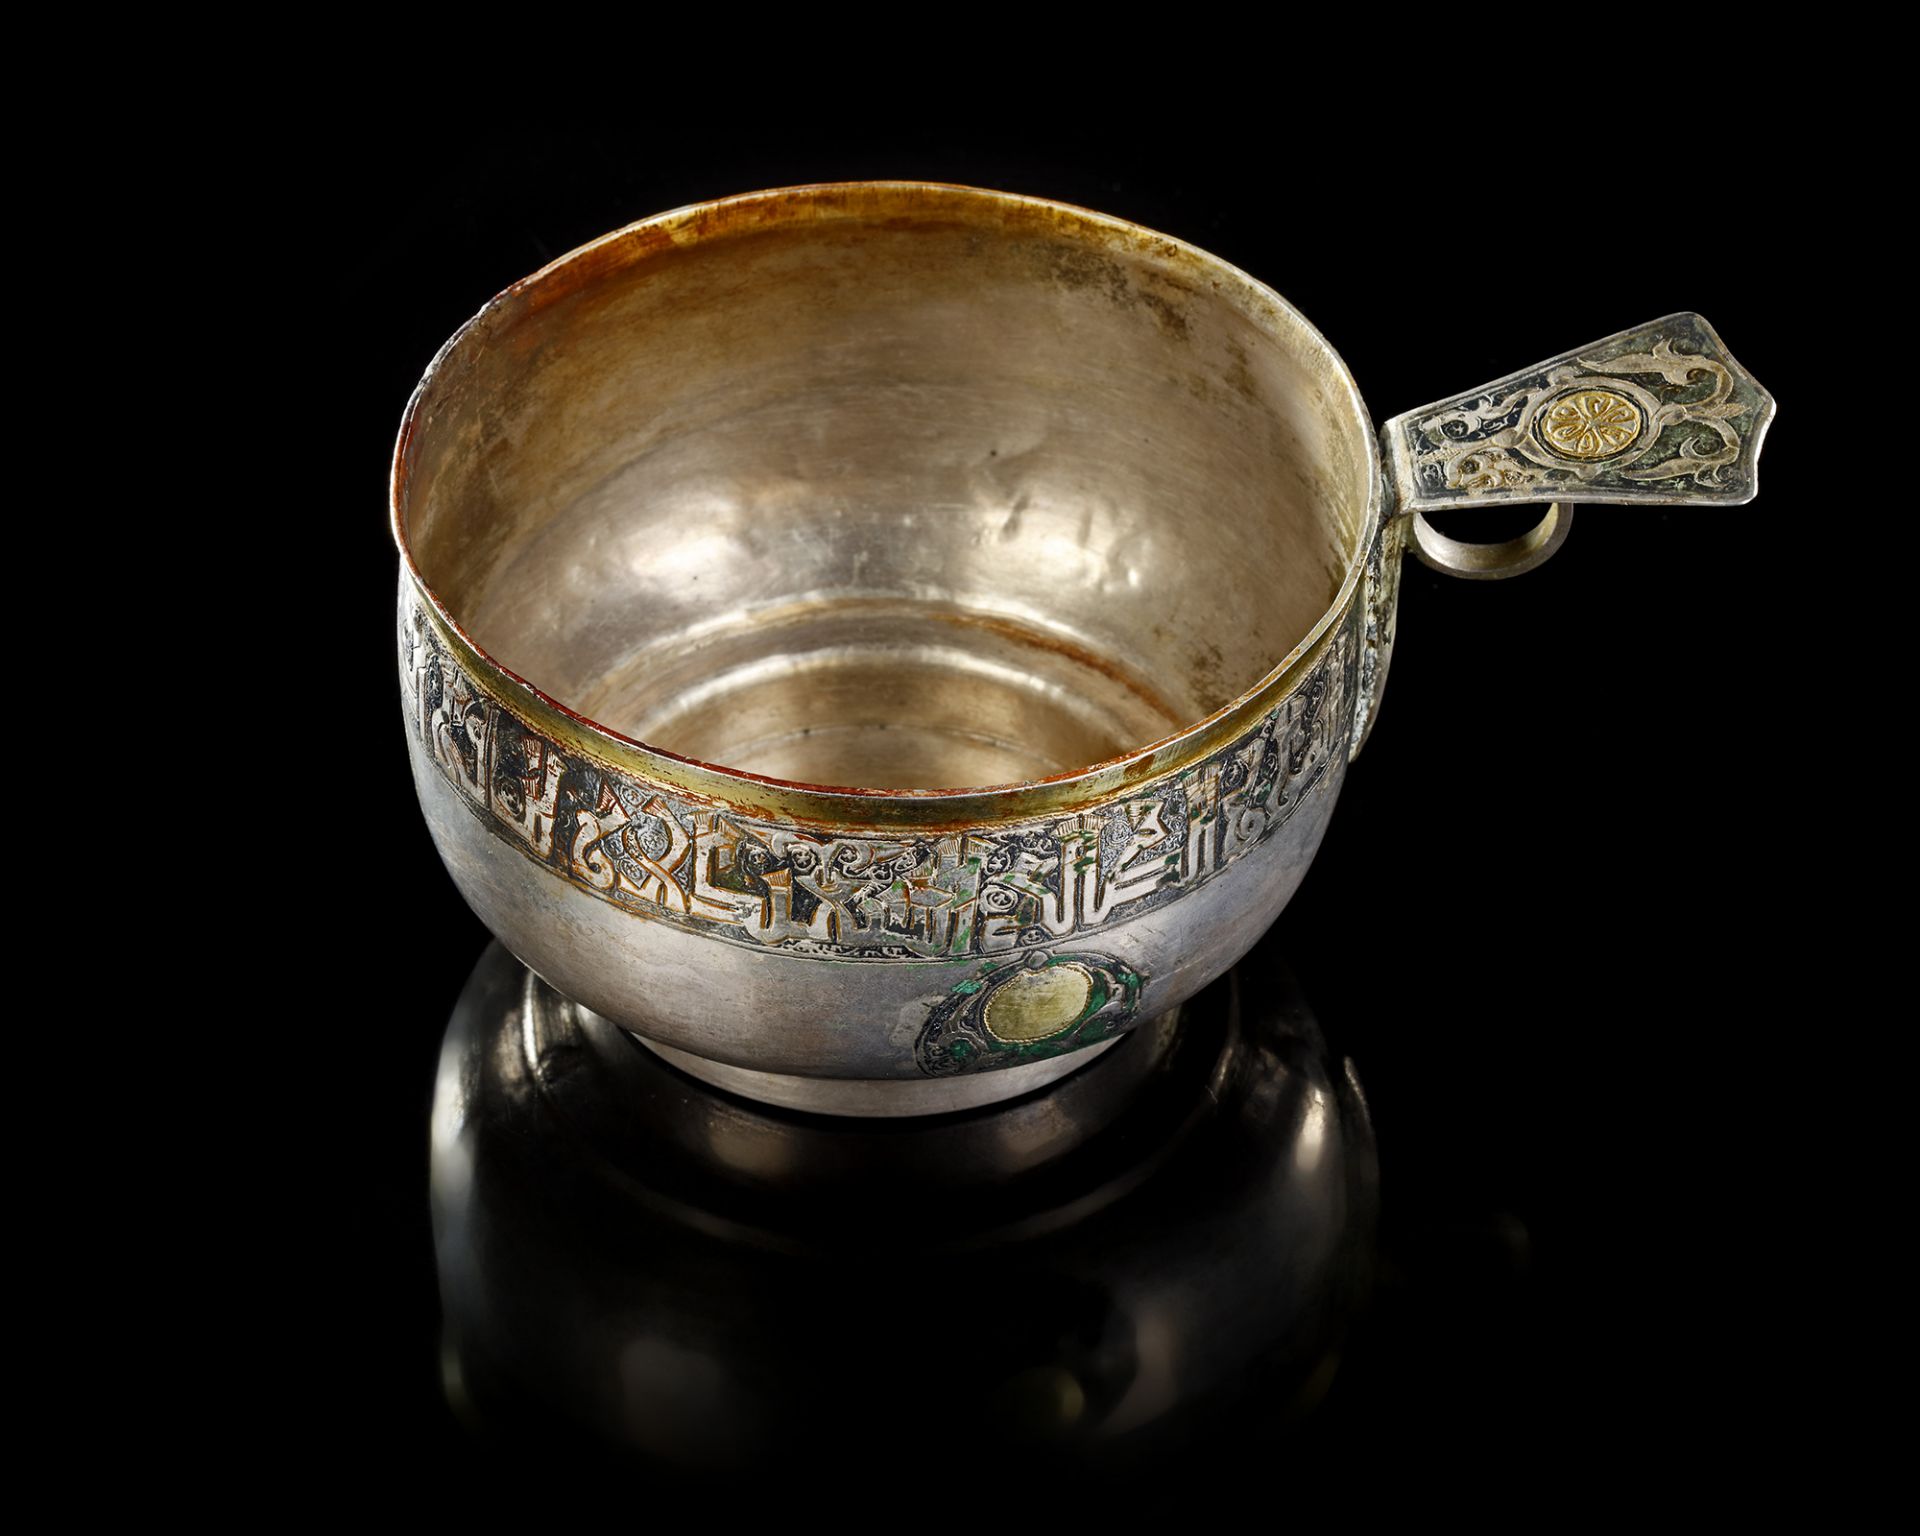 A RARE SILVER AND NIELLOED CUP WITH KUFIC INSCRIPTION, PERSIA OR CENTRAL ASIA, 11TH-12TH CENTURY - Image 4 of 34